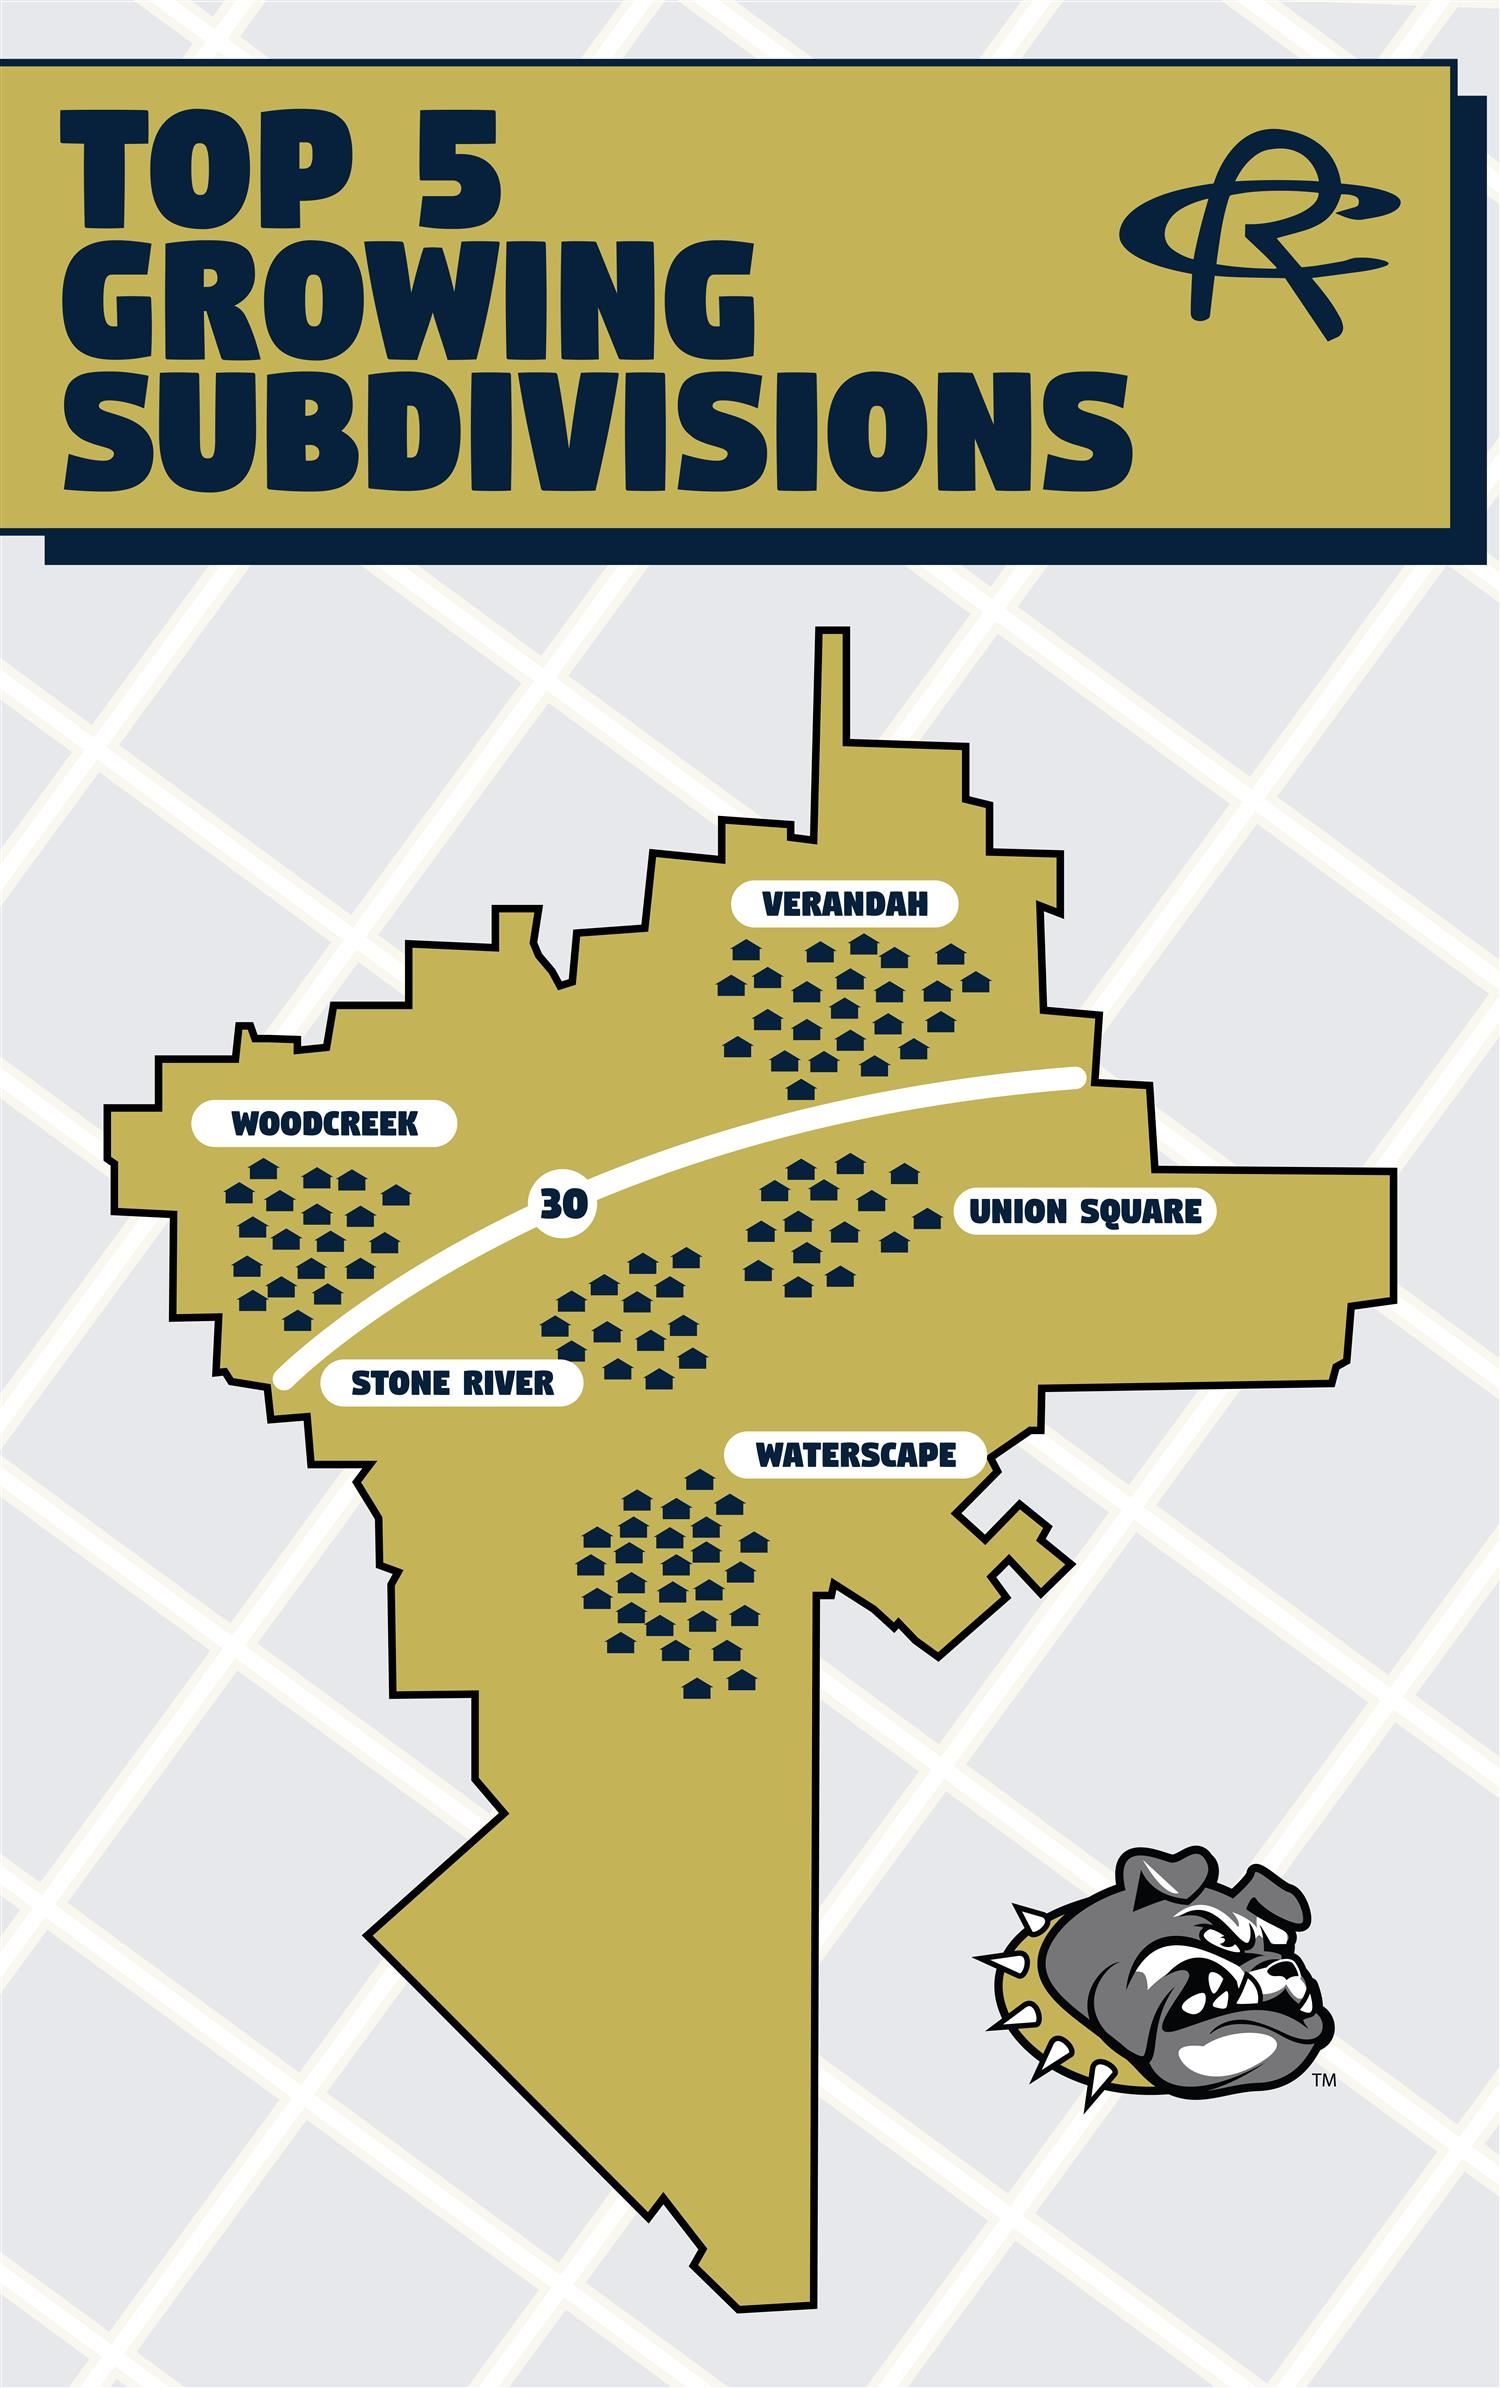 Top 5 Growing Subdivisions 